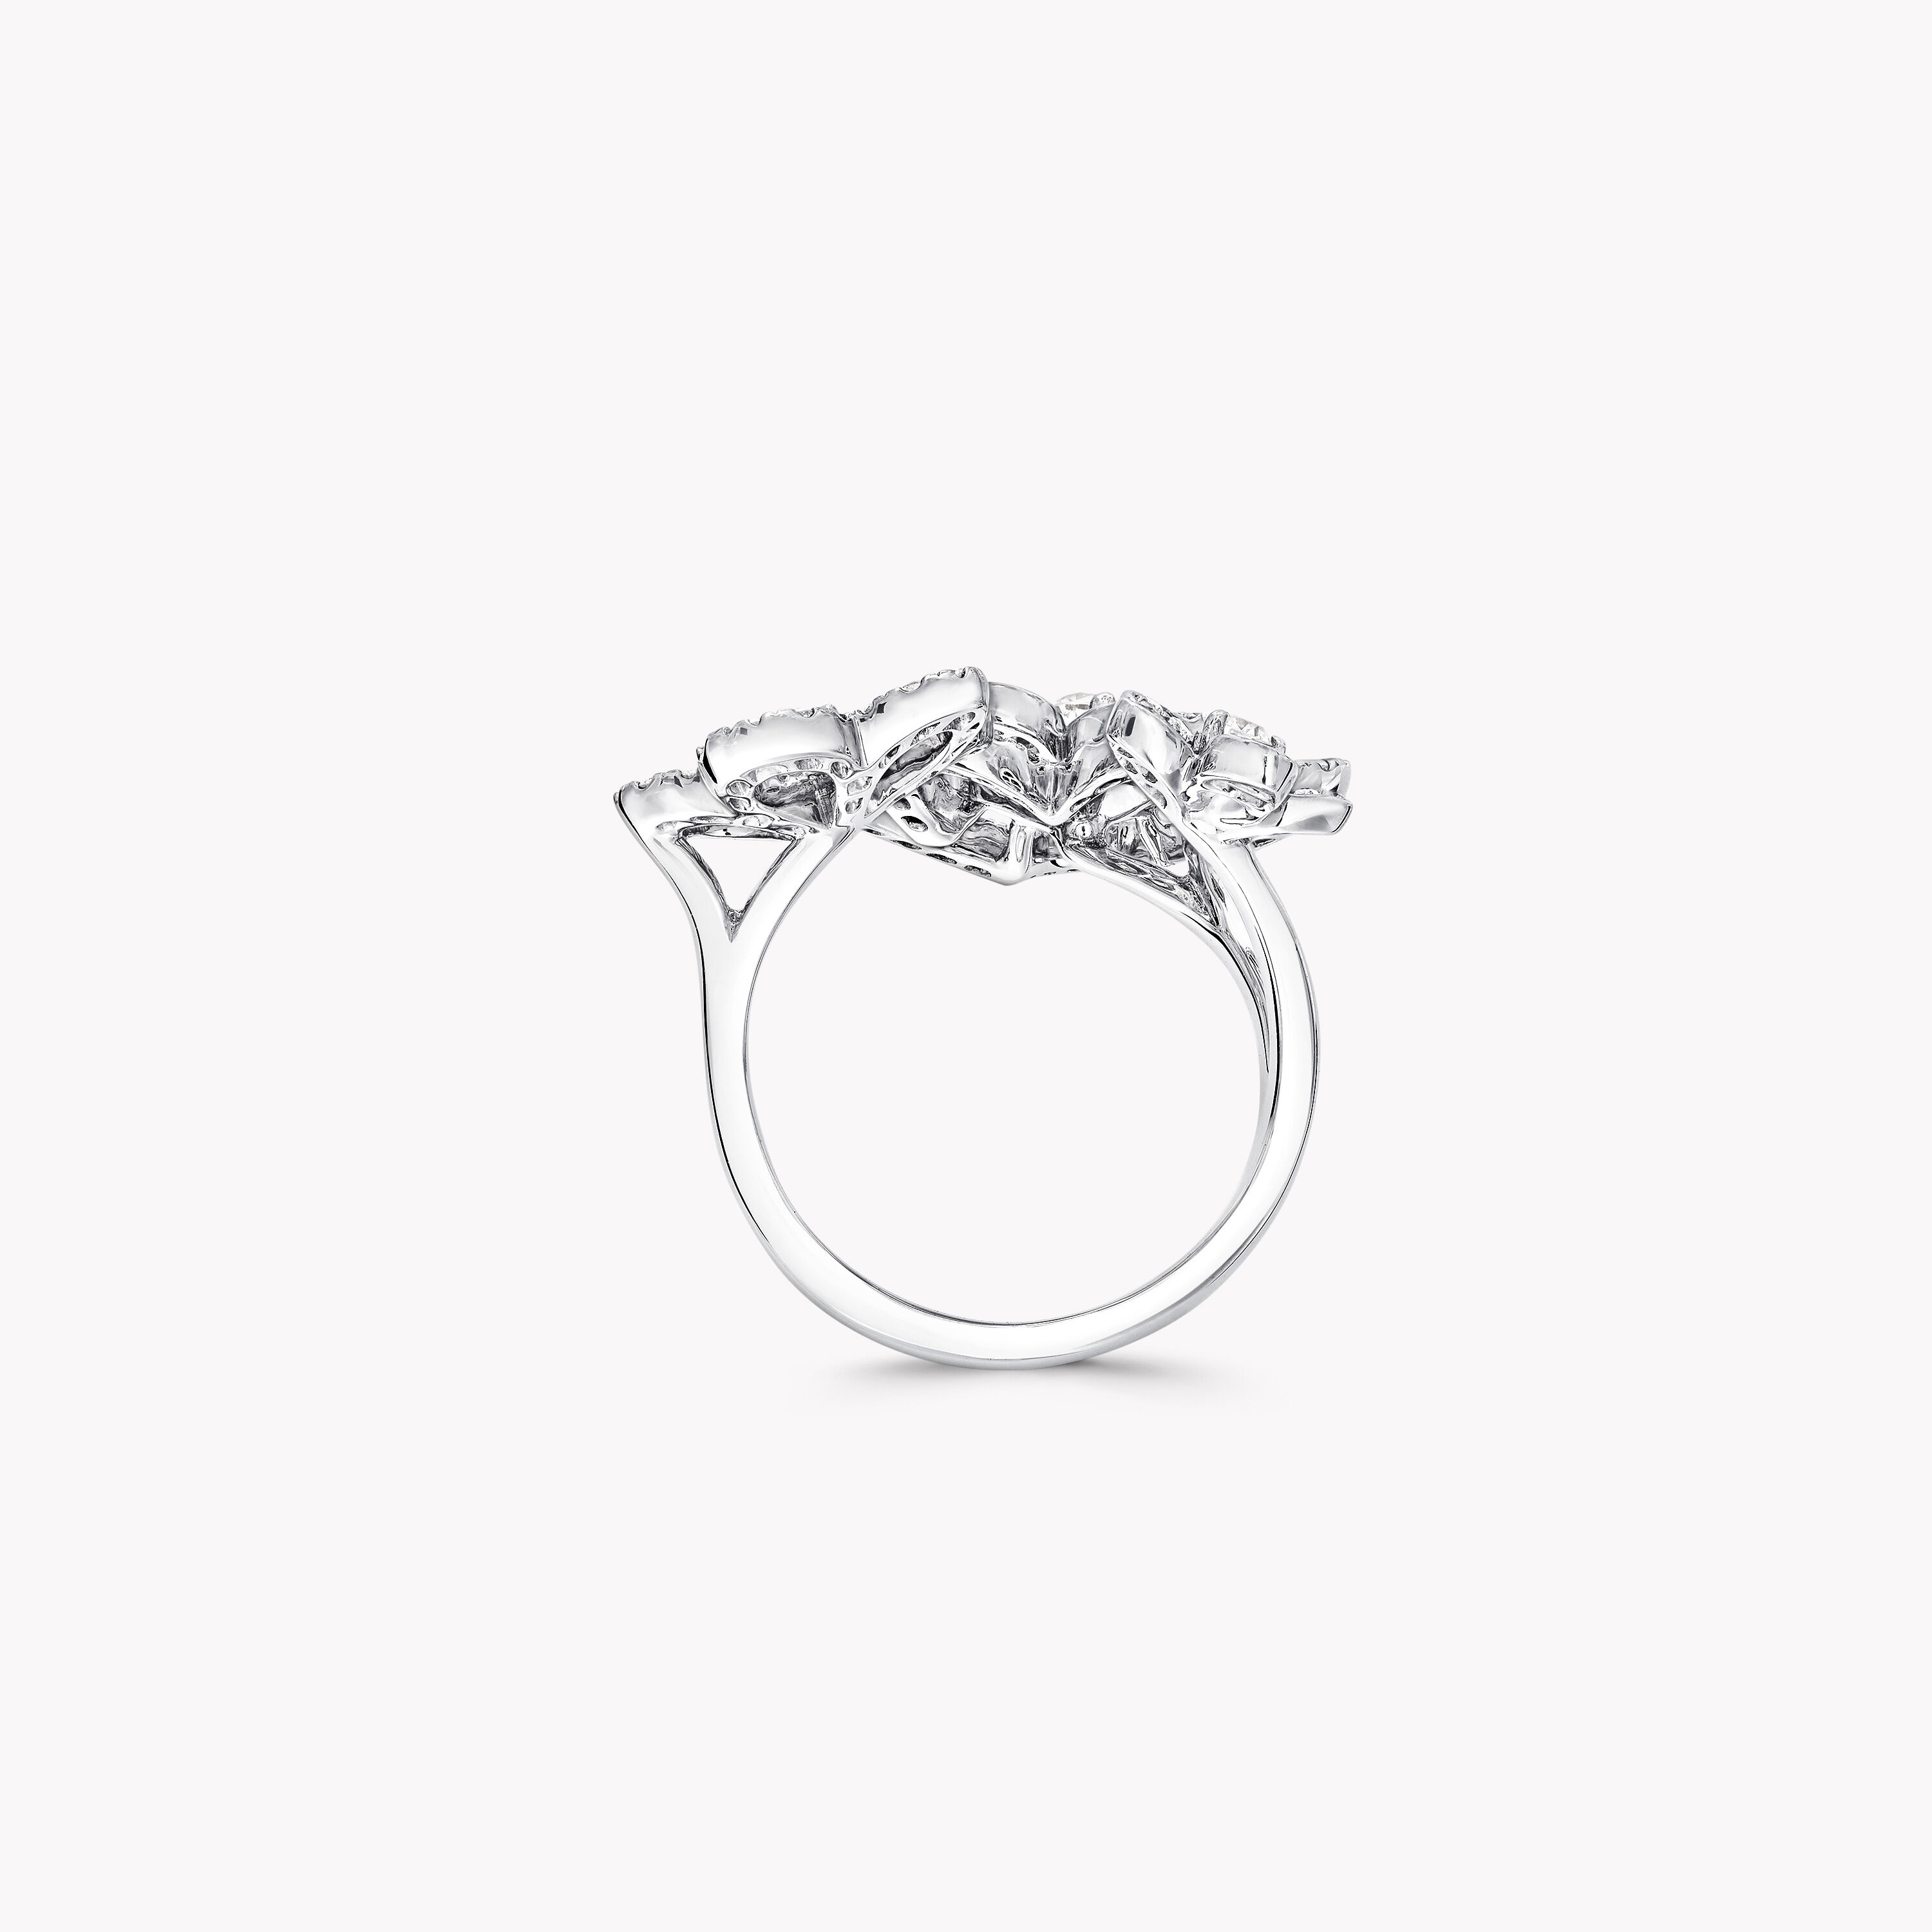 Buy Sparkling Floral Diamond Rings |GRT Jewellers